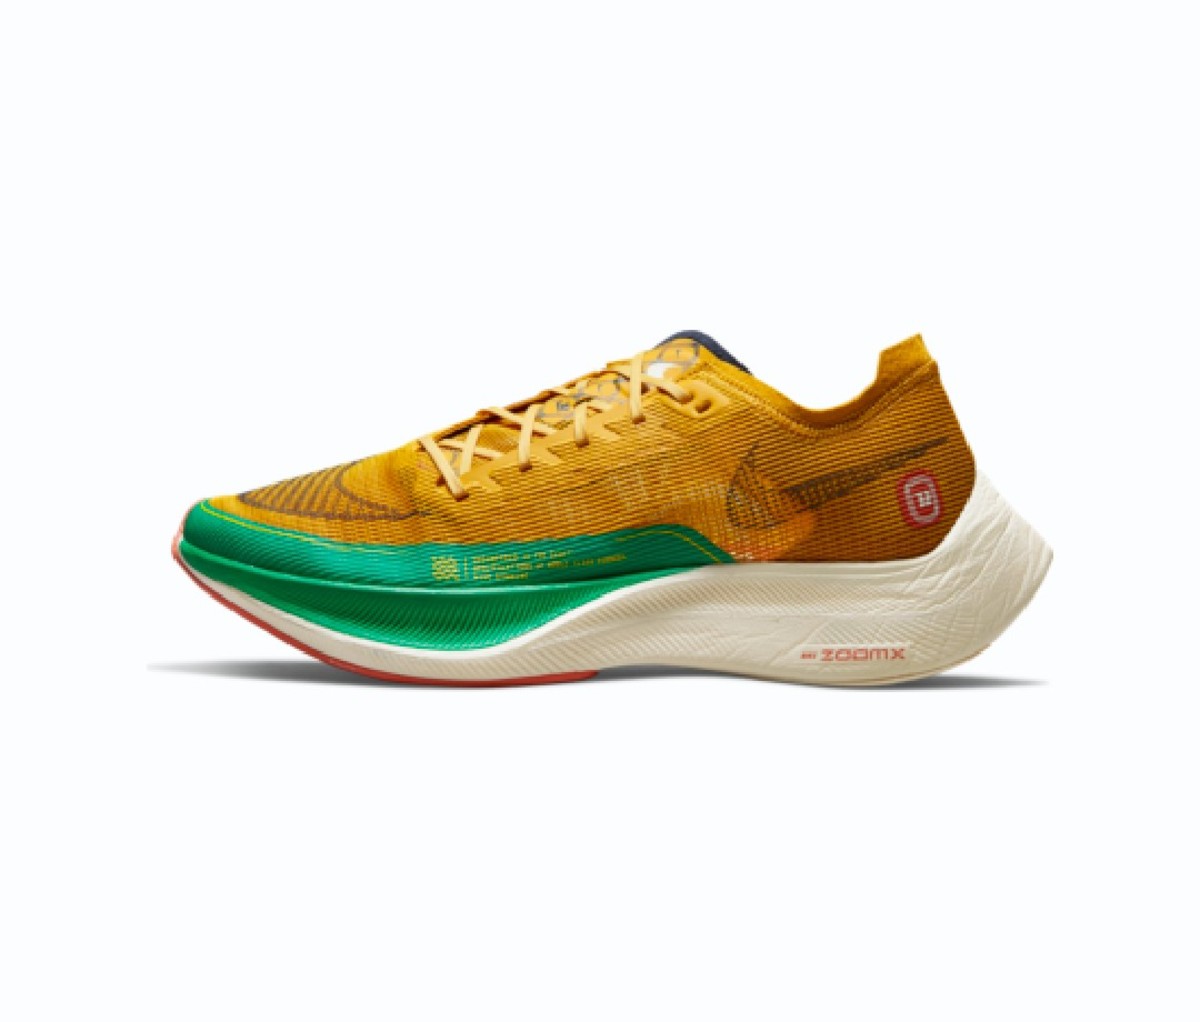 Hayward Field Collection Nike ZoomX Vaporfly Next% 2